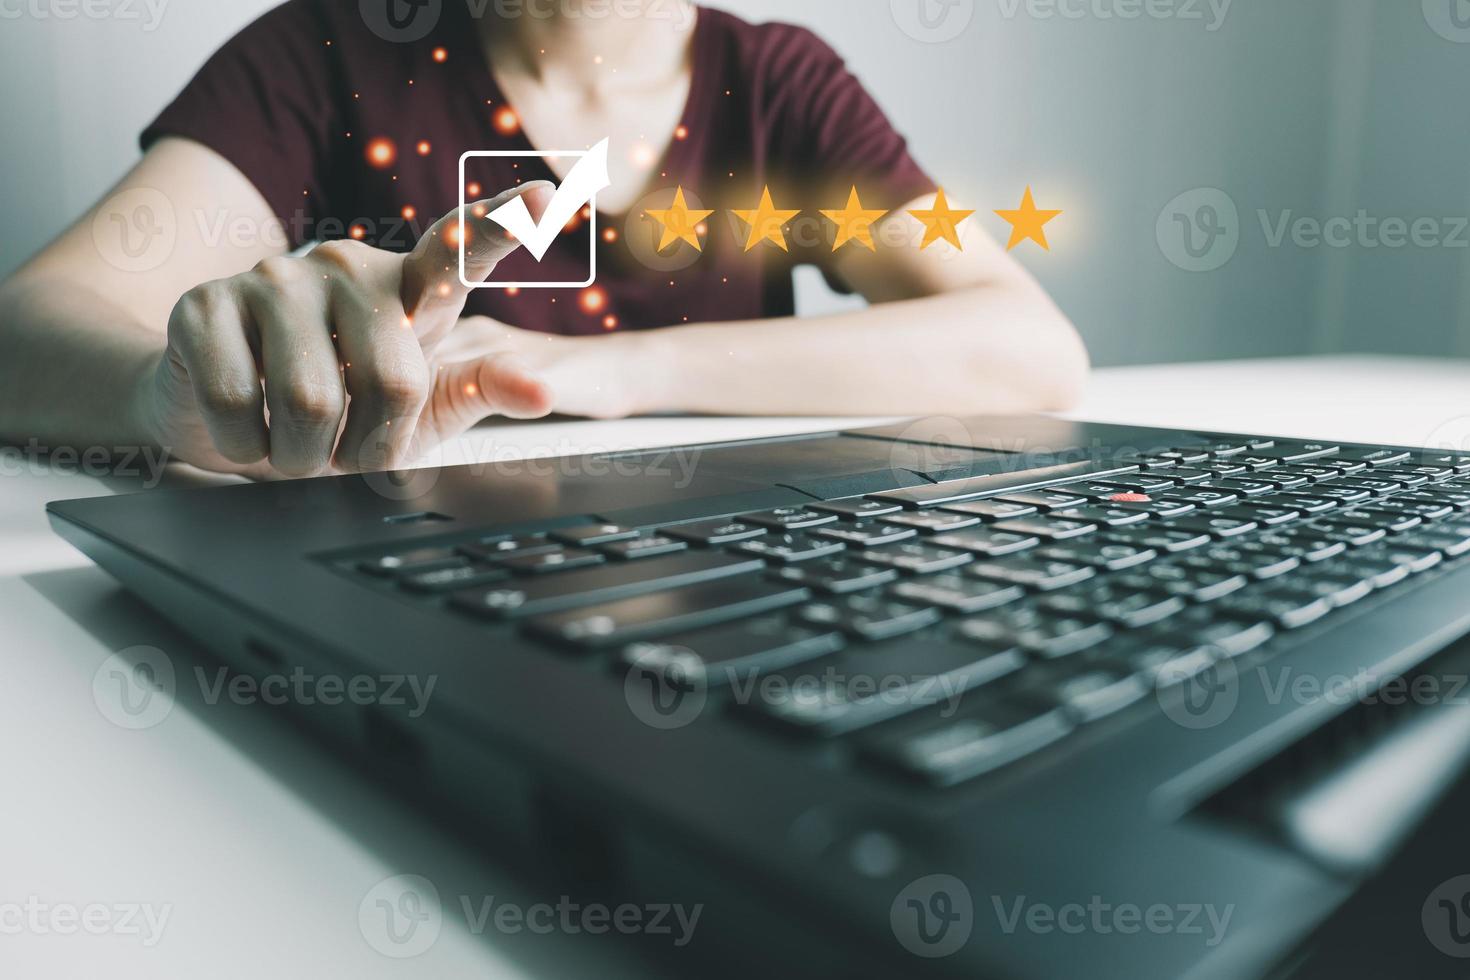 Customer satisfaction assessment rating 5 stars by notebook, User has received excellent service, Review the highest rated service, the best attention, impressed very good service, feedback from guest photo